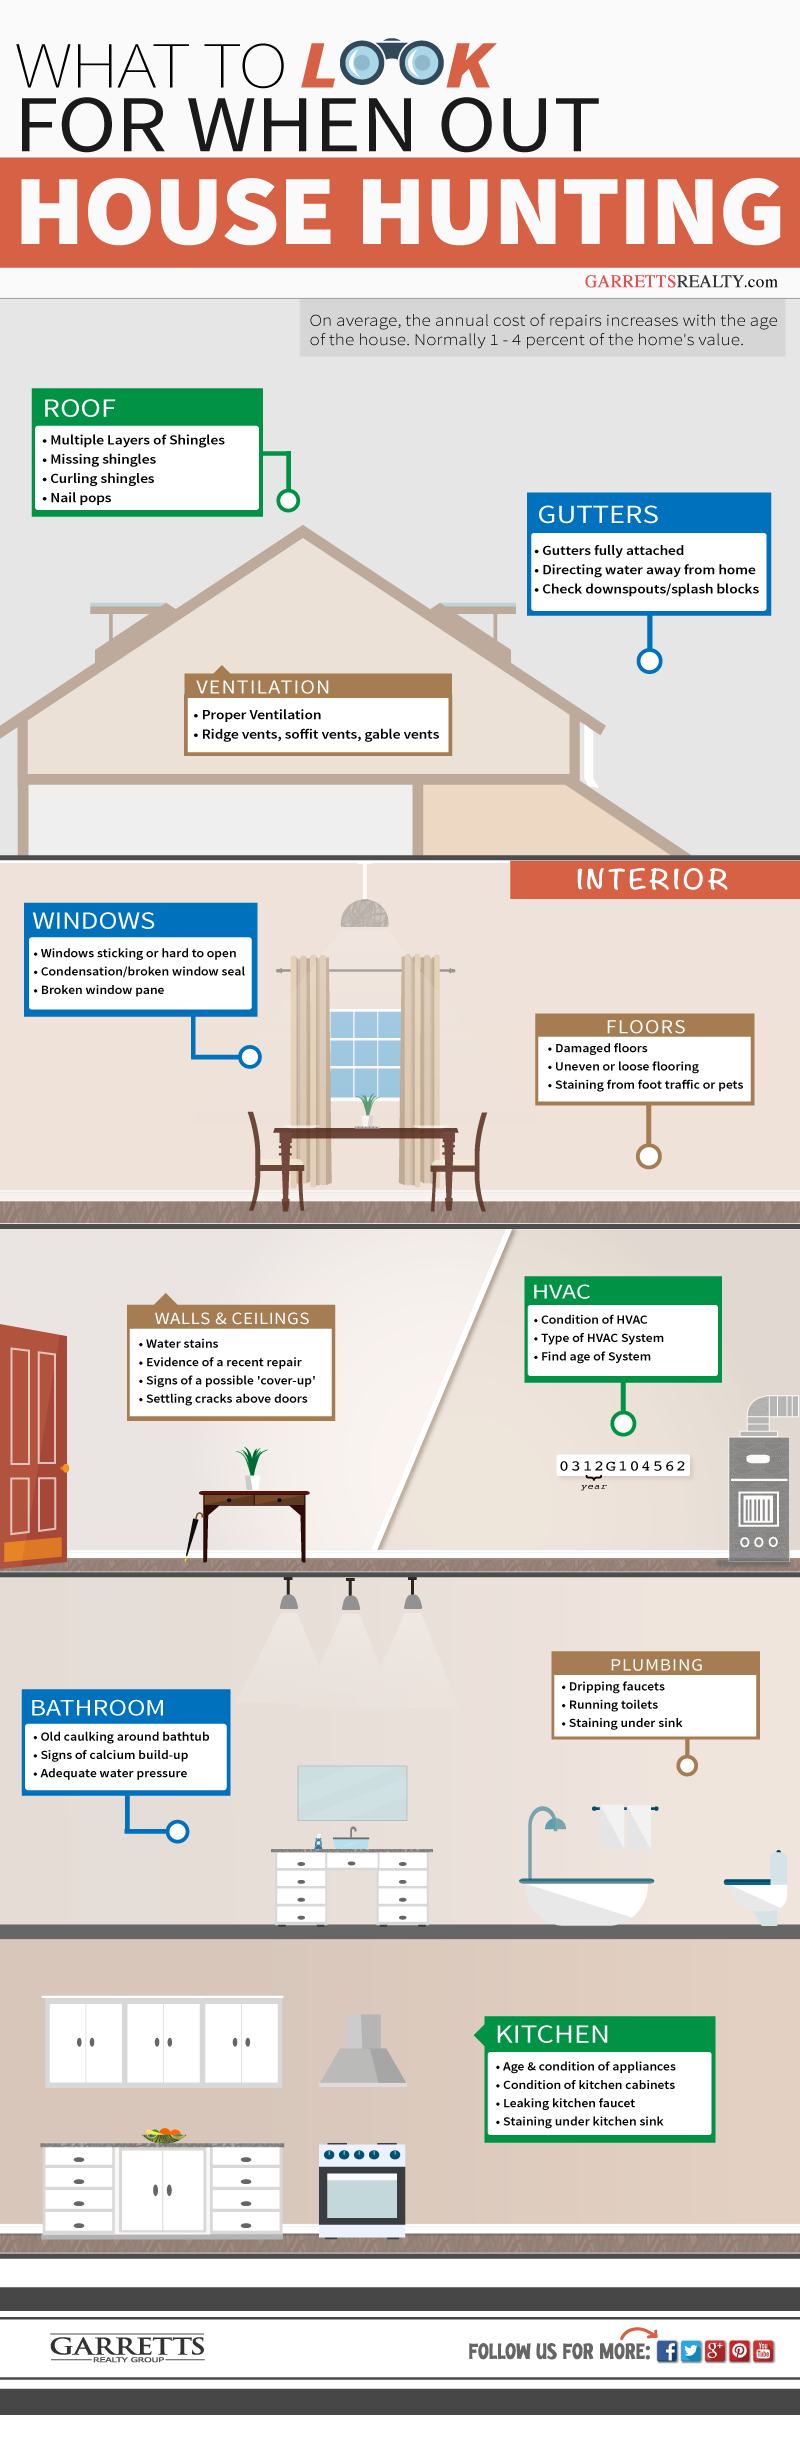 house hunting tips - Infographic.